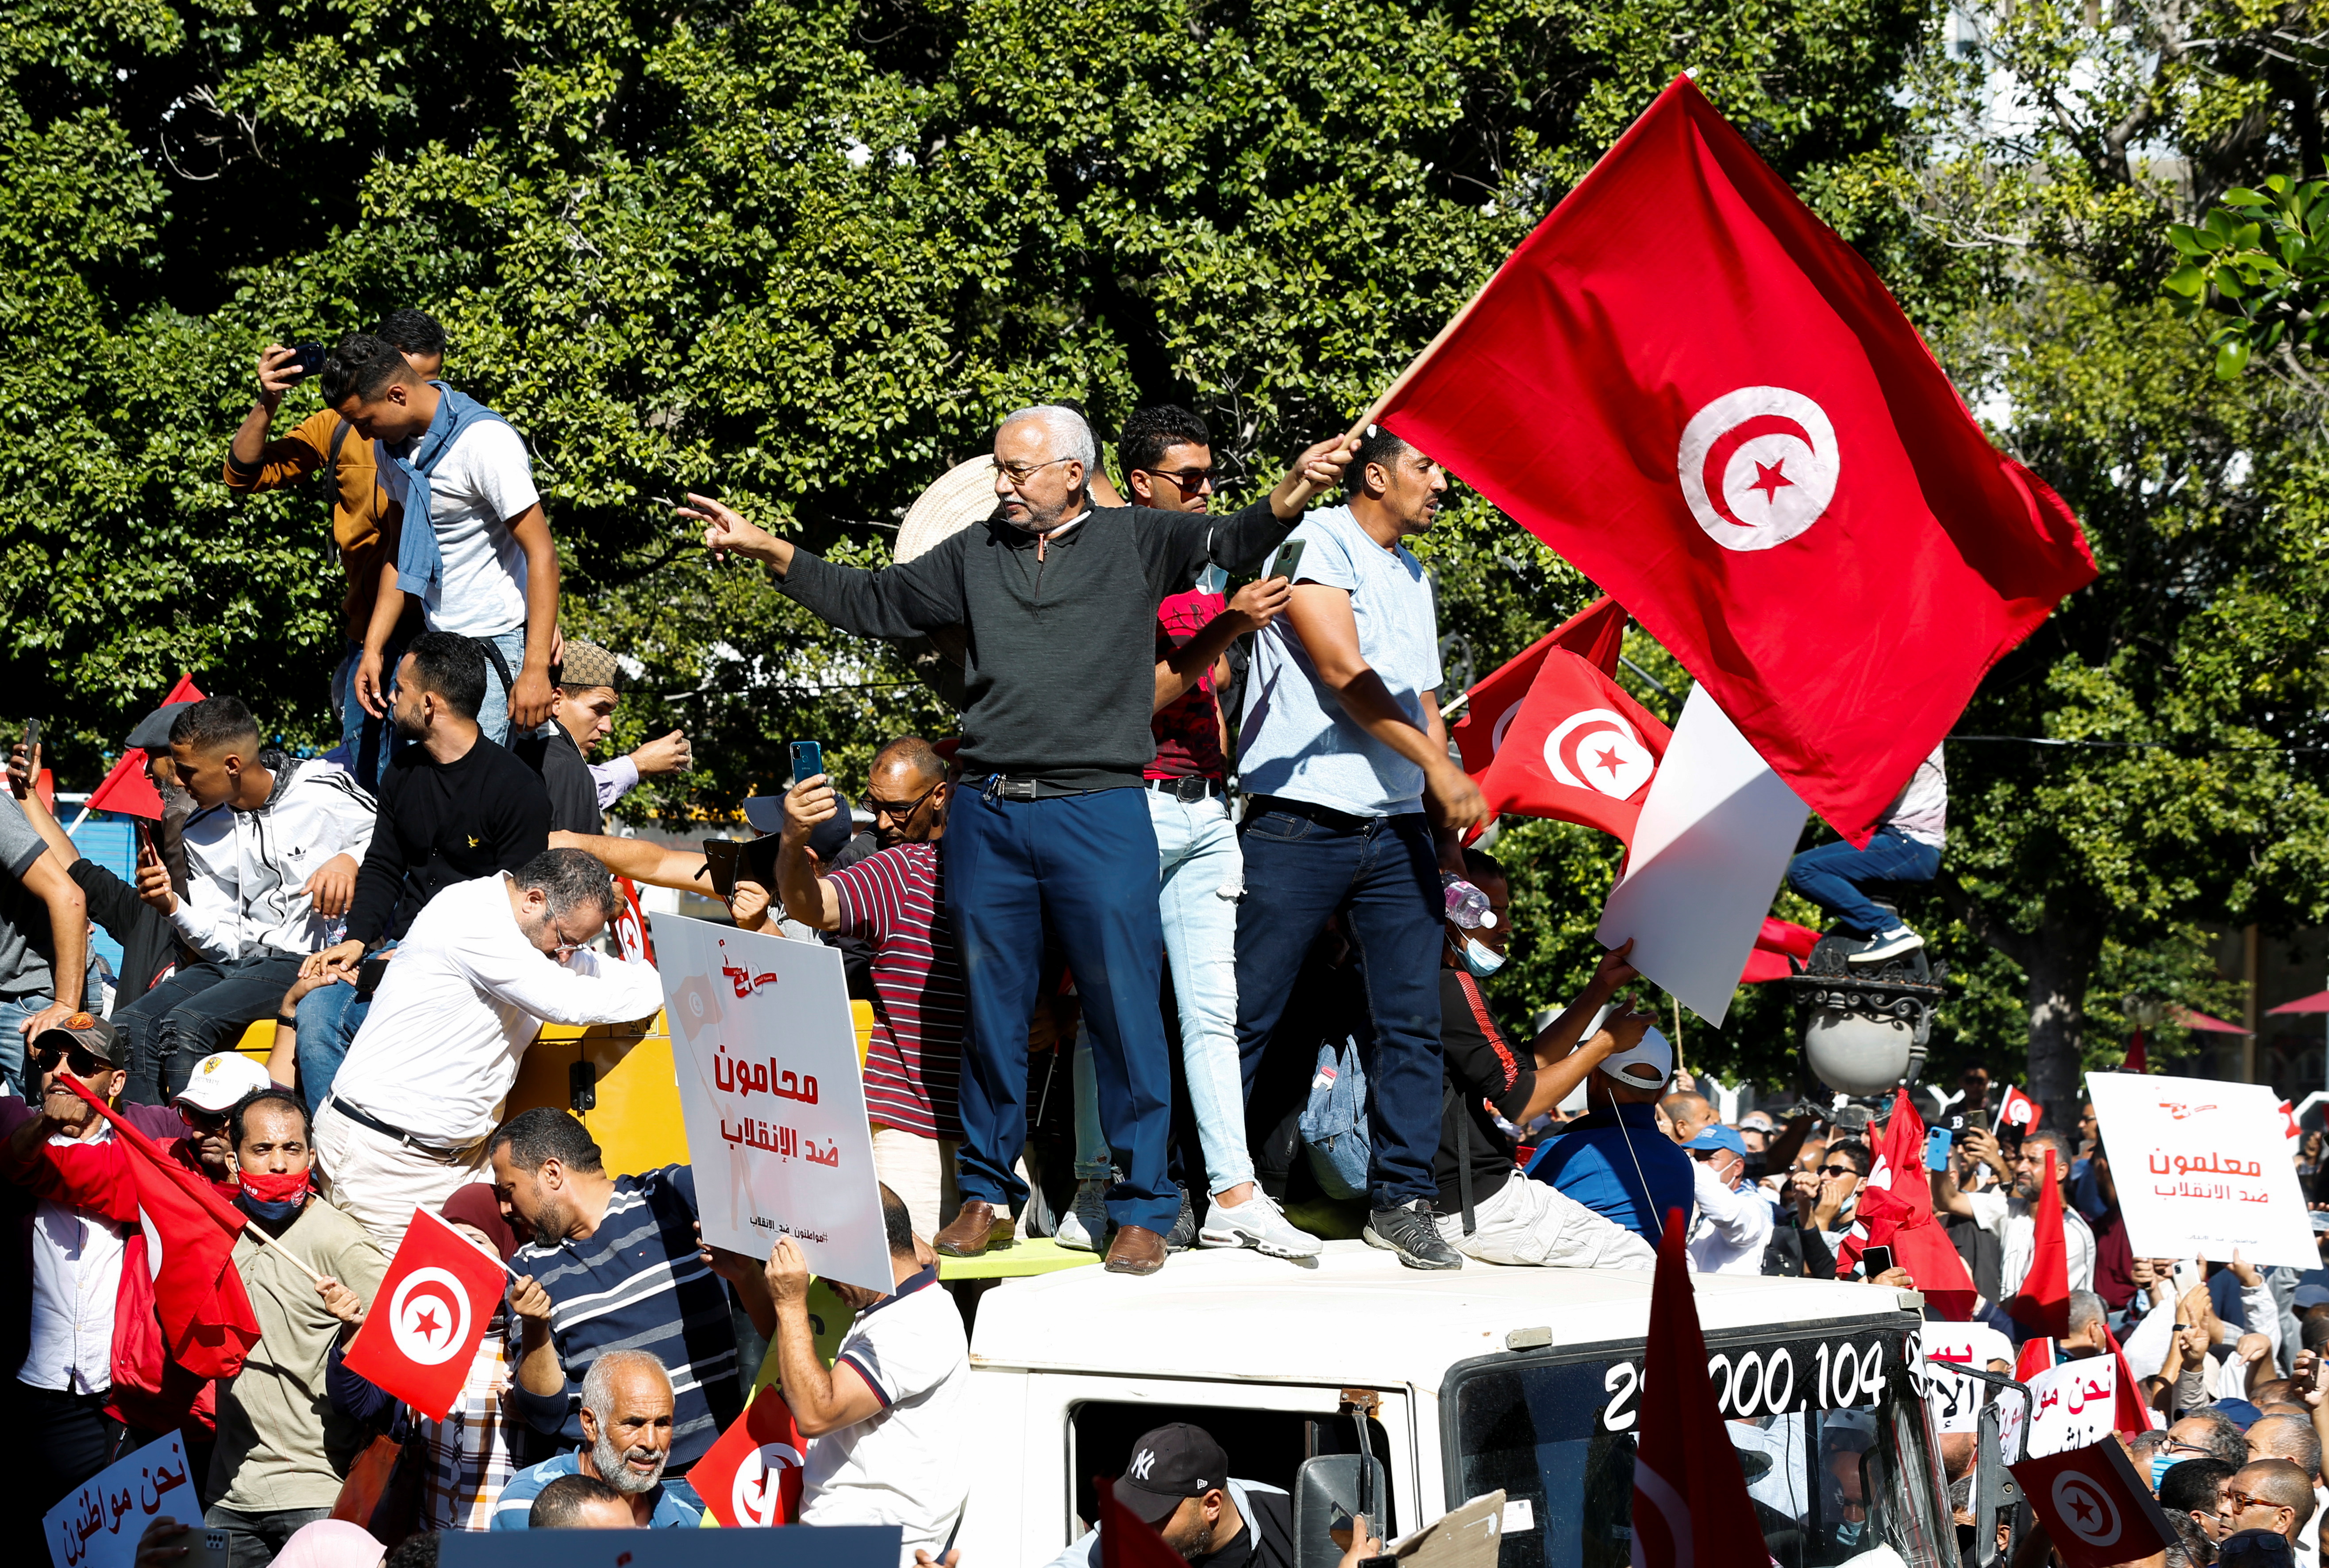 Protest against Tunisian President Kais Saied's seizure of governing powers, in Tunis